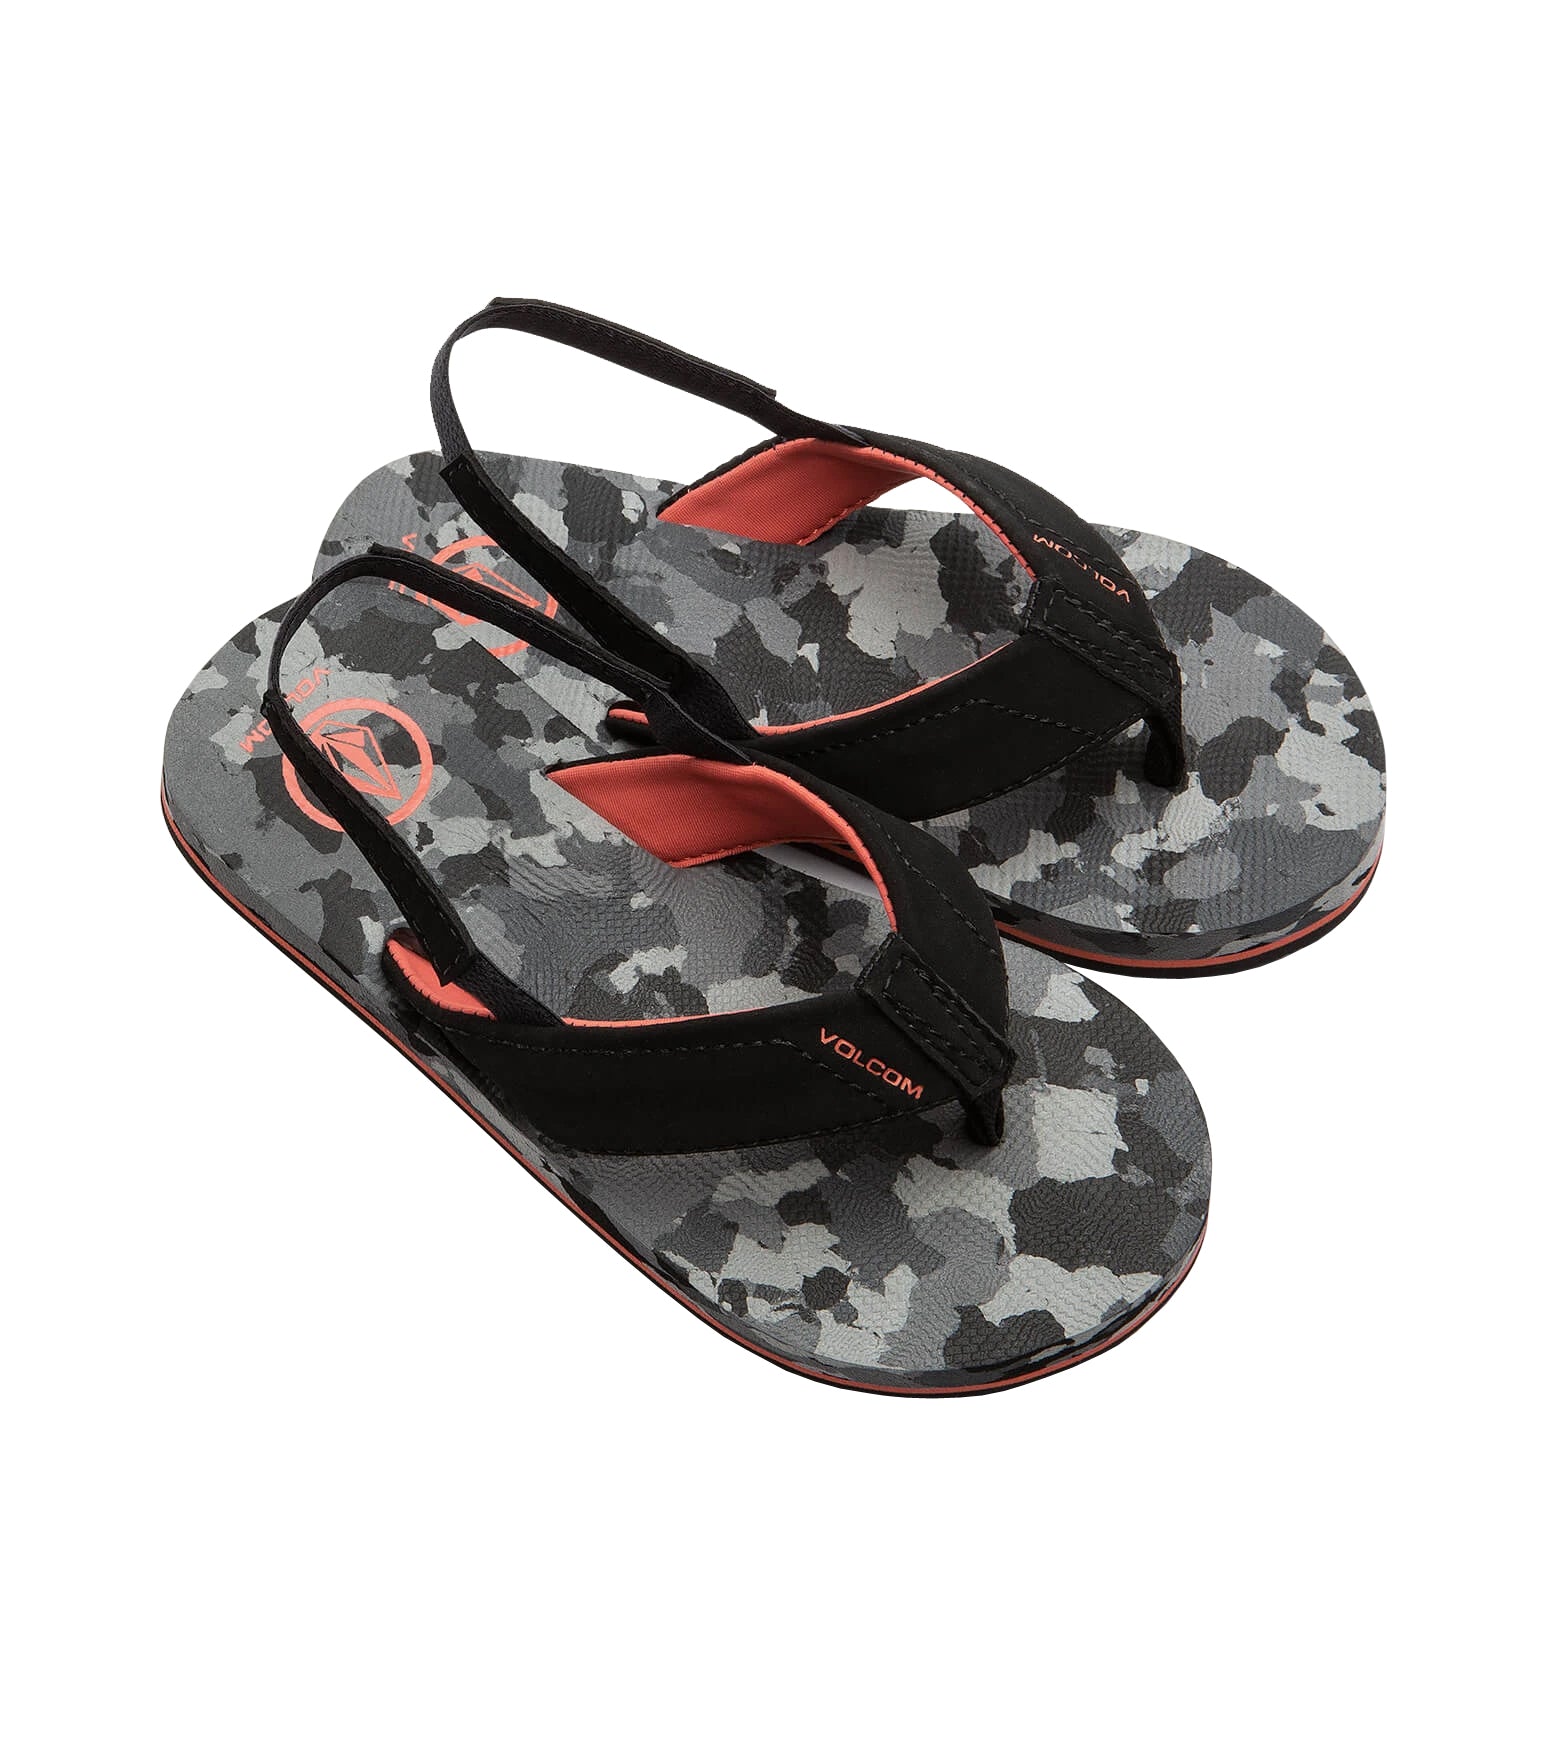 Volcom Victor Little Youth Boys Sandal CAM-Camouflage 11 C